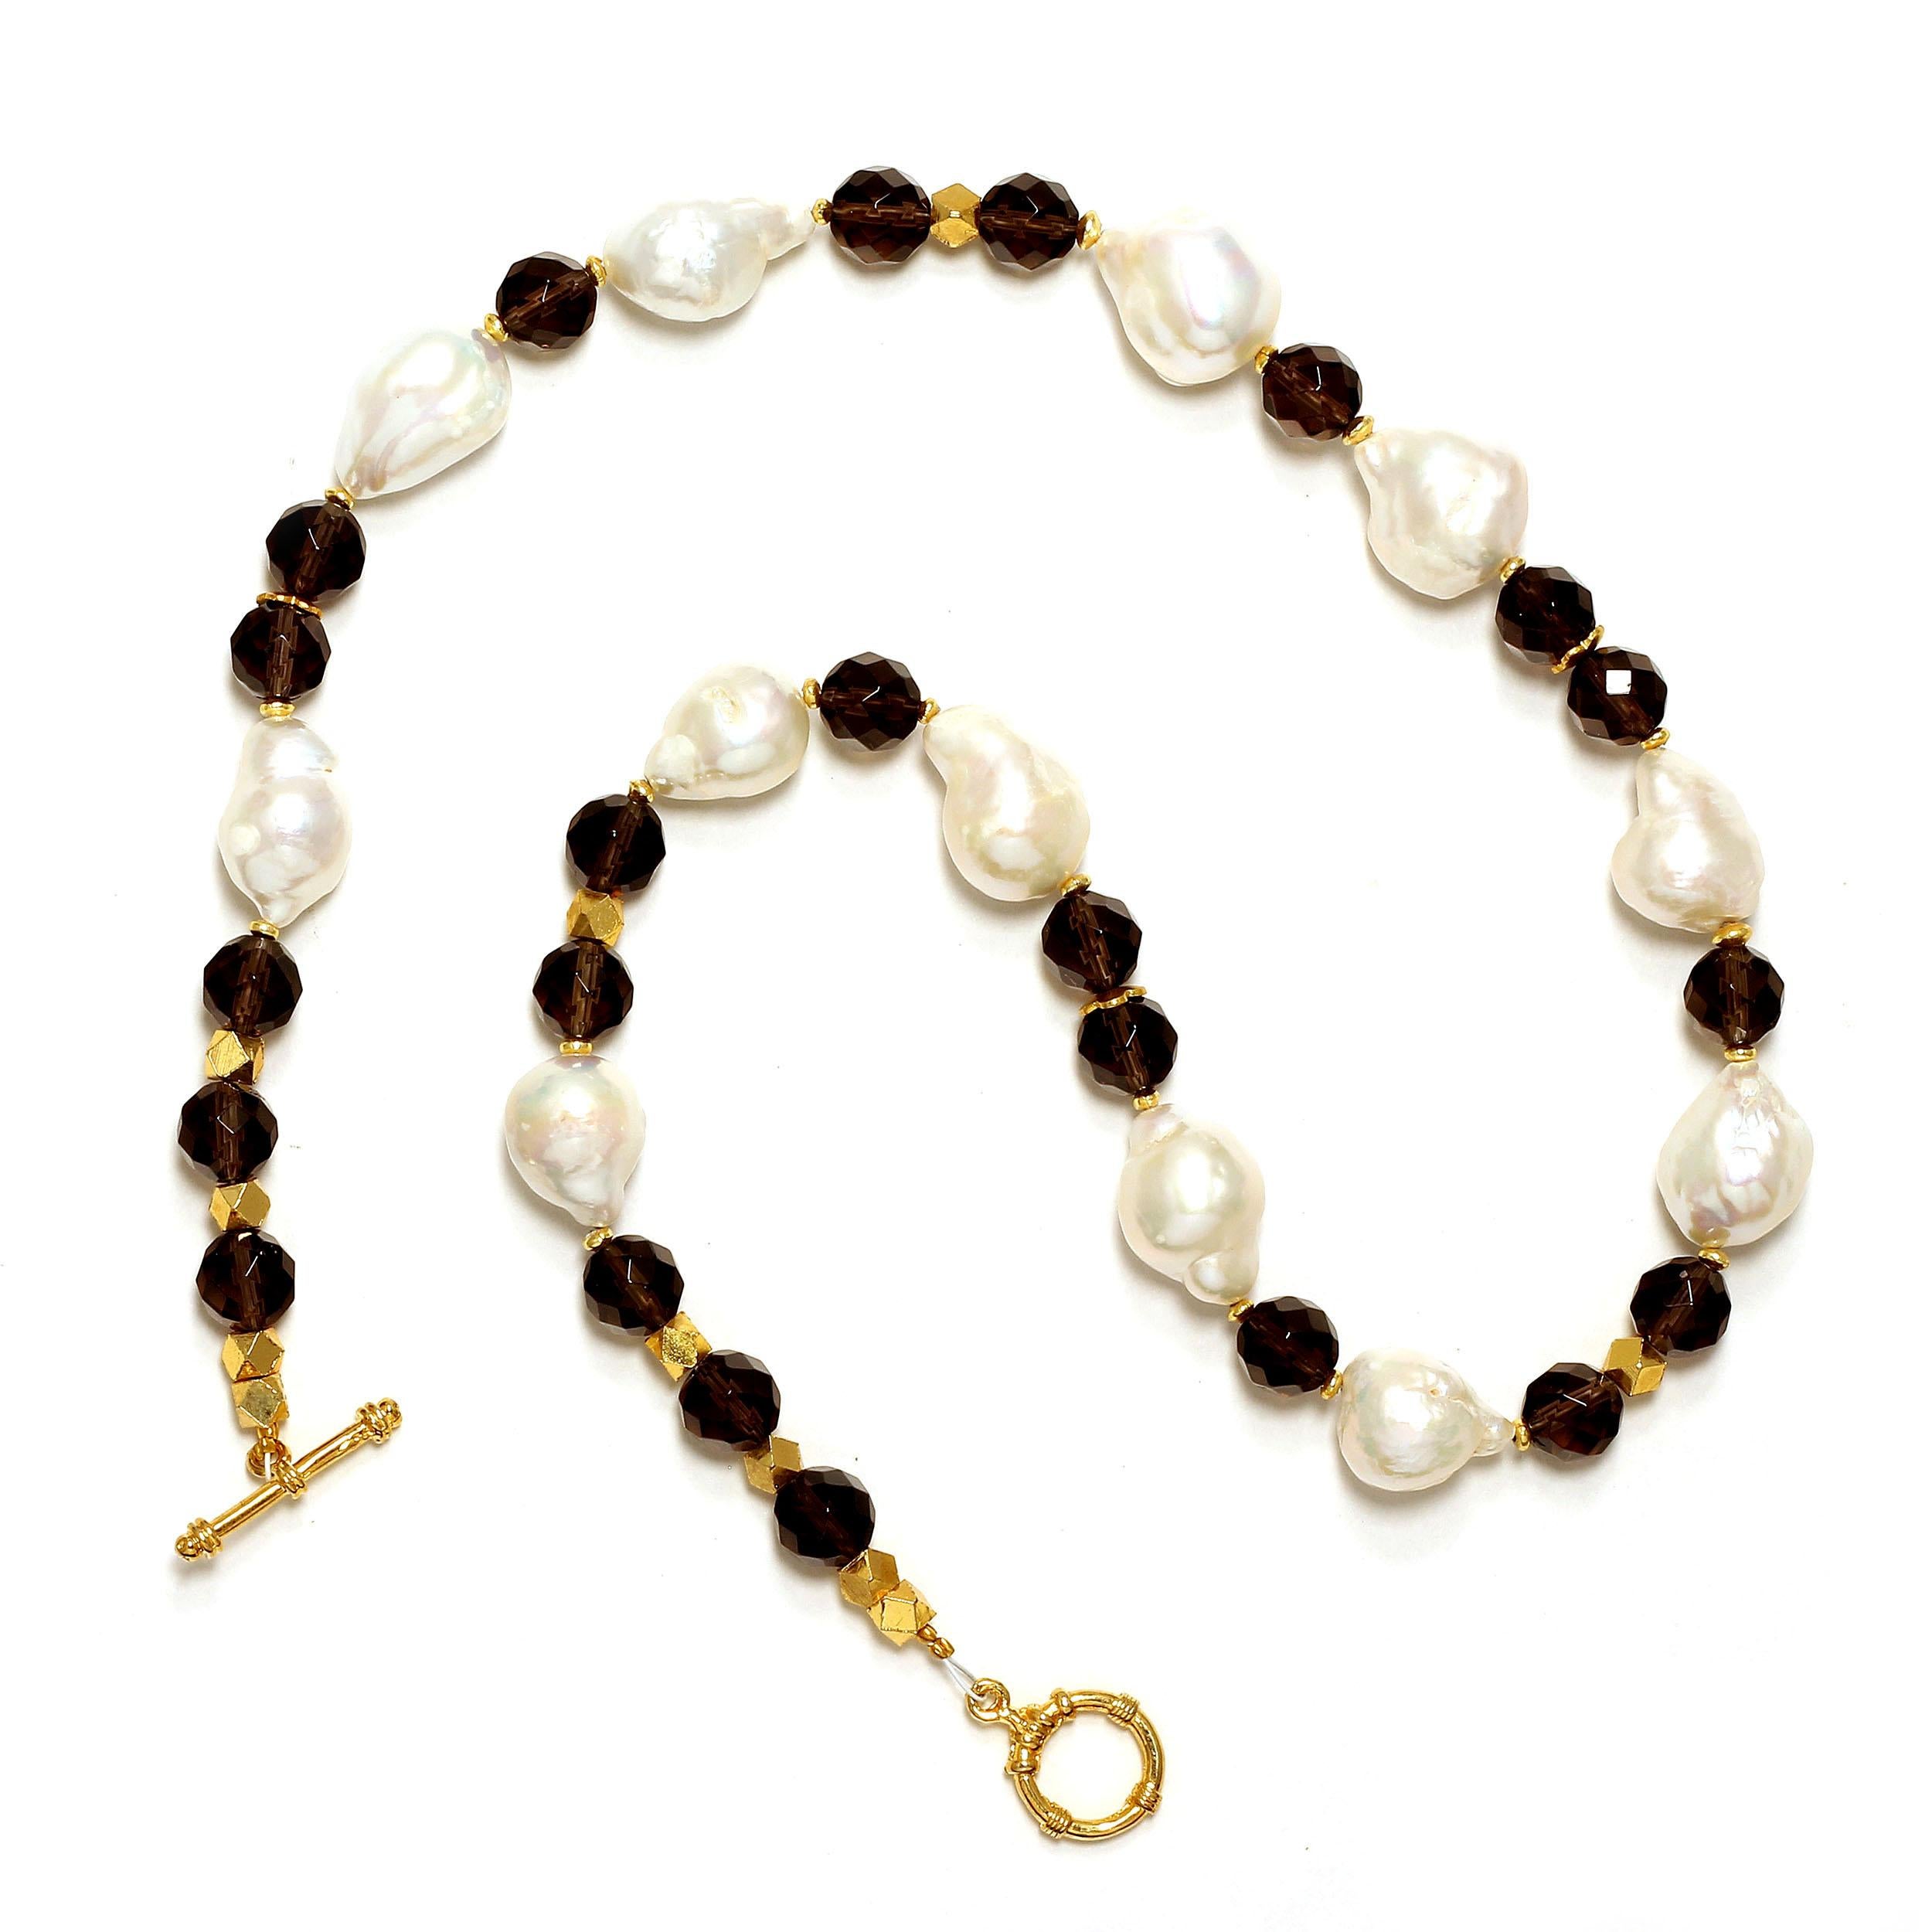 Bead AJD Freshwater Pearl and Smoky Quartz Necklace June Birthstone